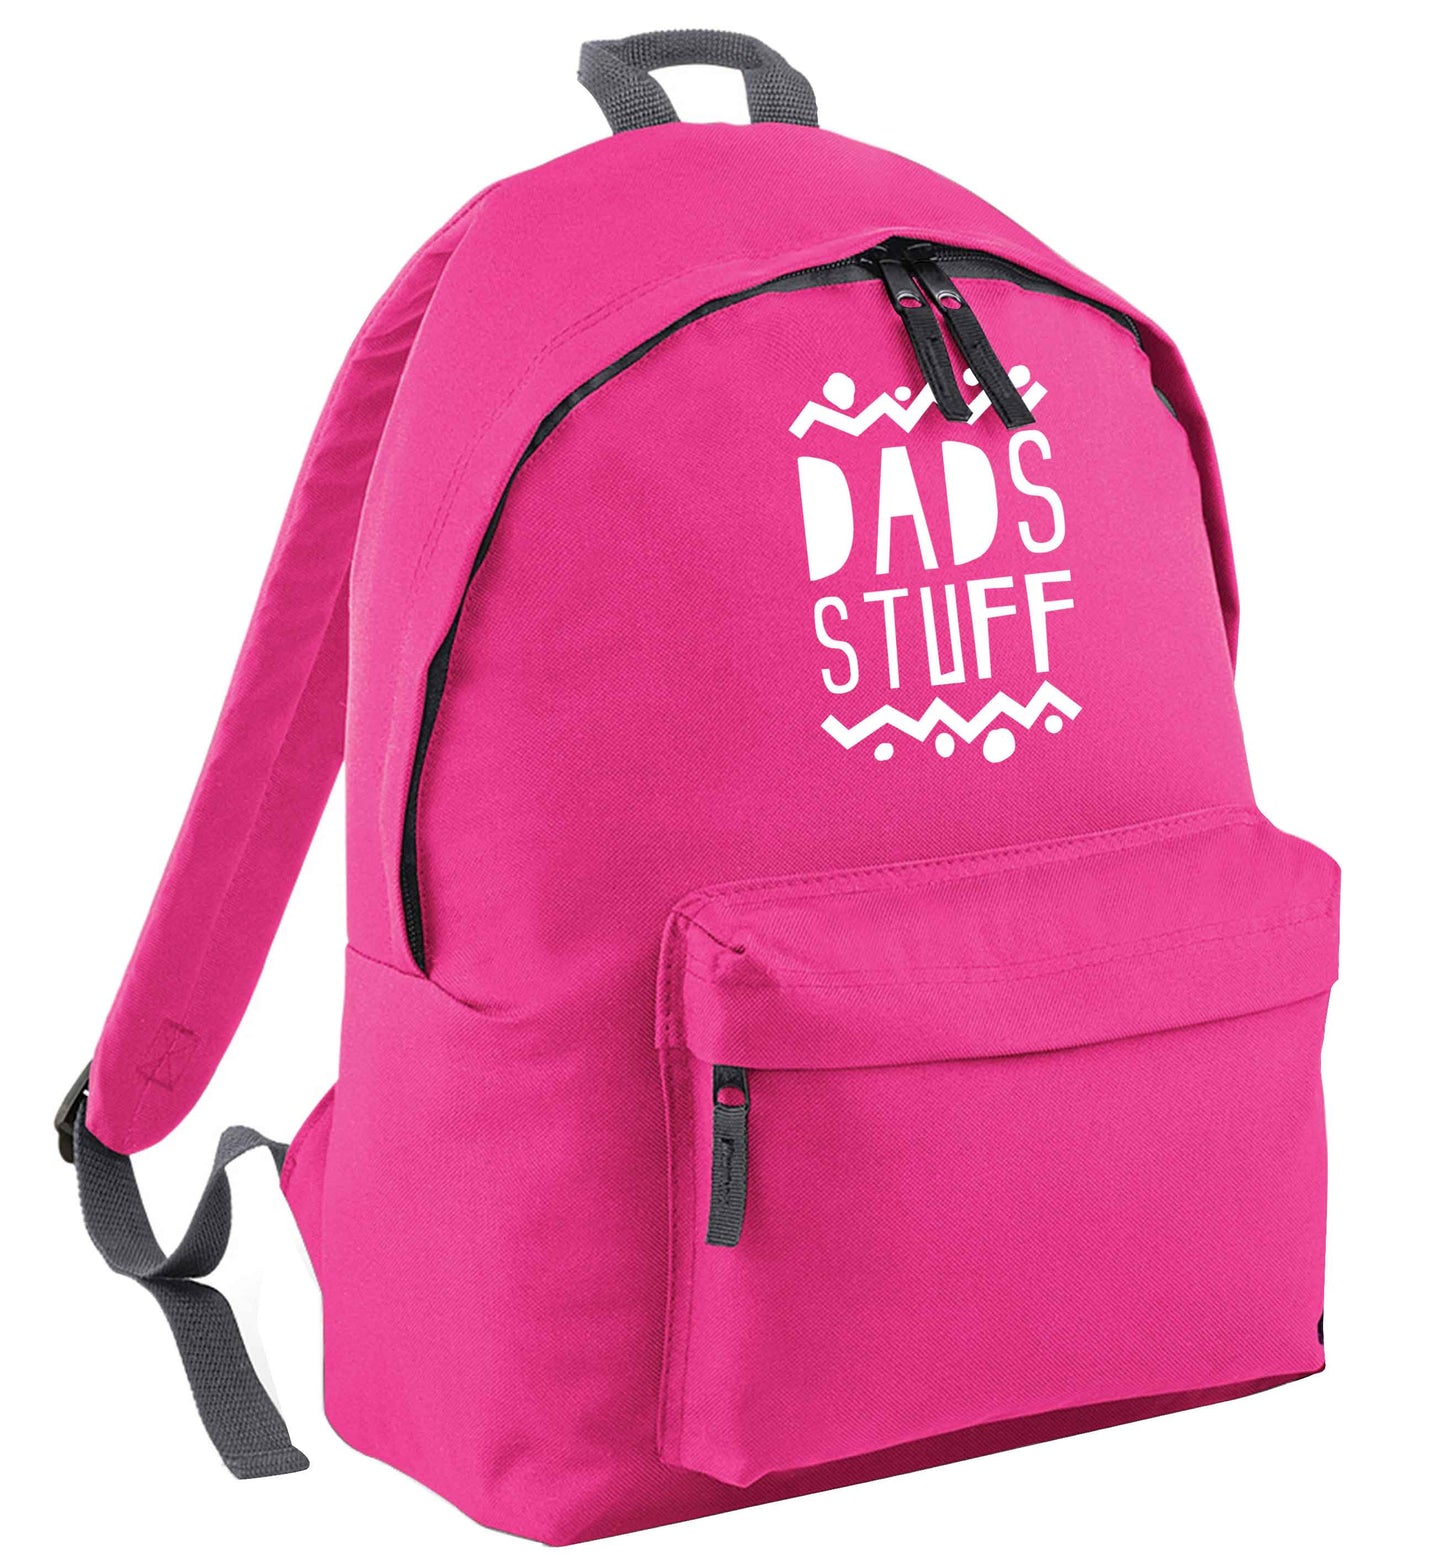 Dads stuff pink adults backpack